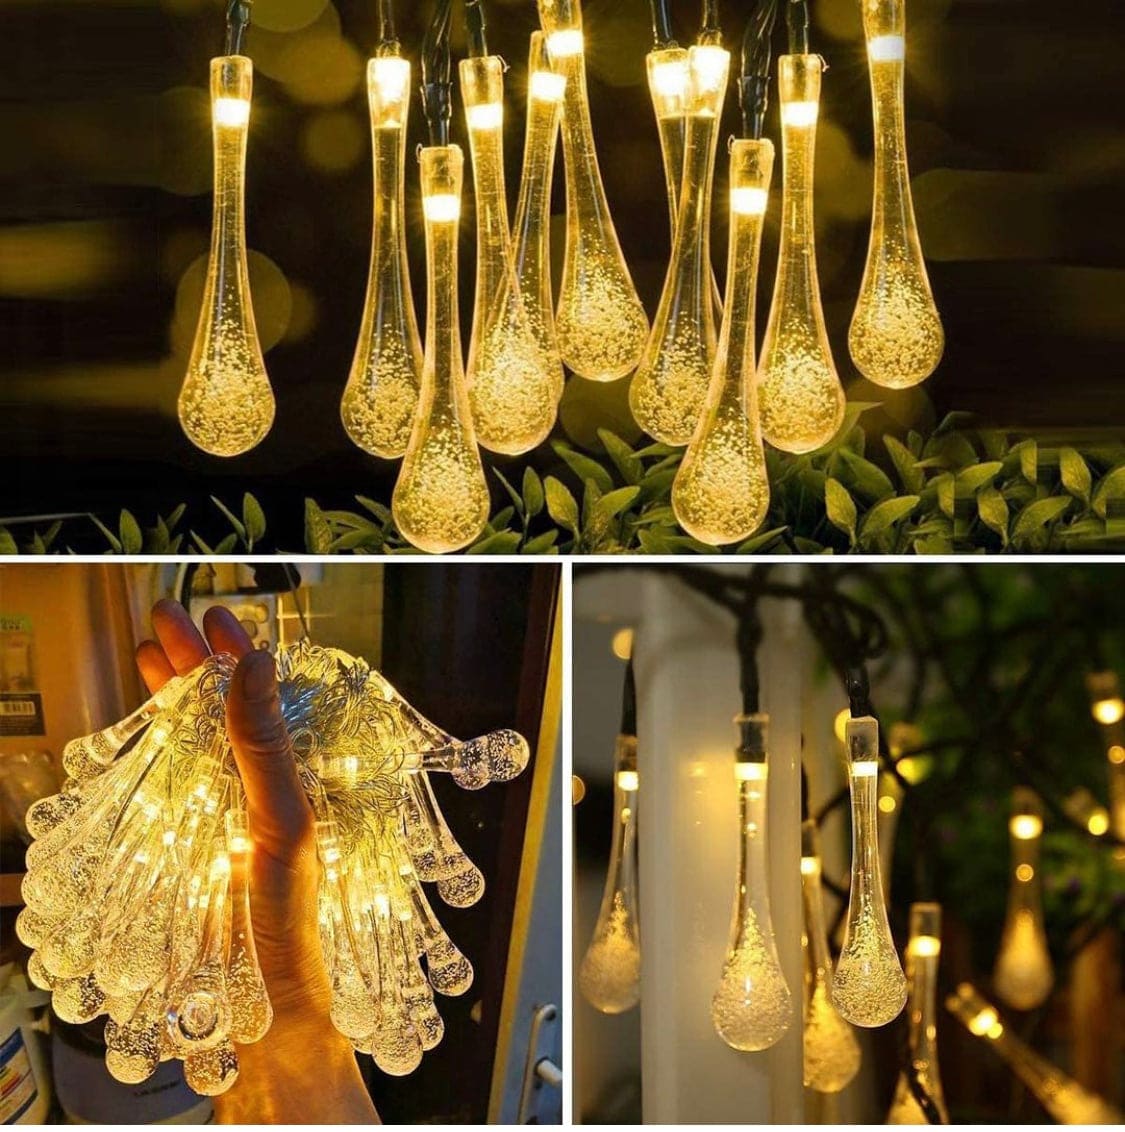 20 Bulbs Water Drop Fairy LED Lights, Lighting Battery Operated Waterproof Lamp, LED Holiday Lamp